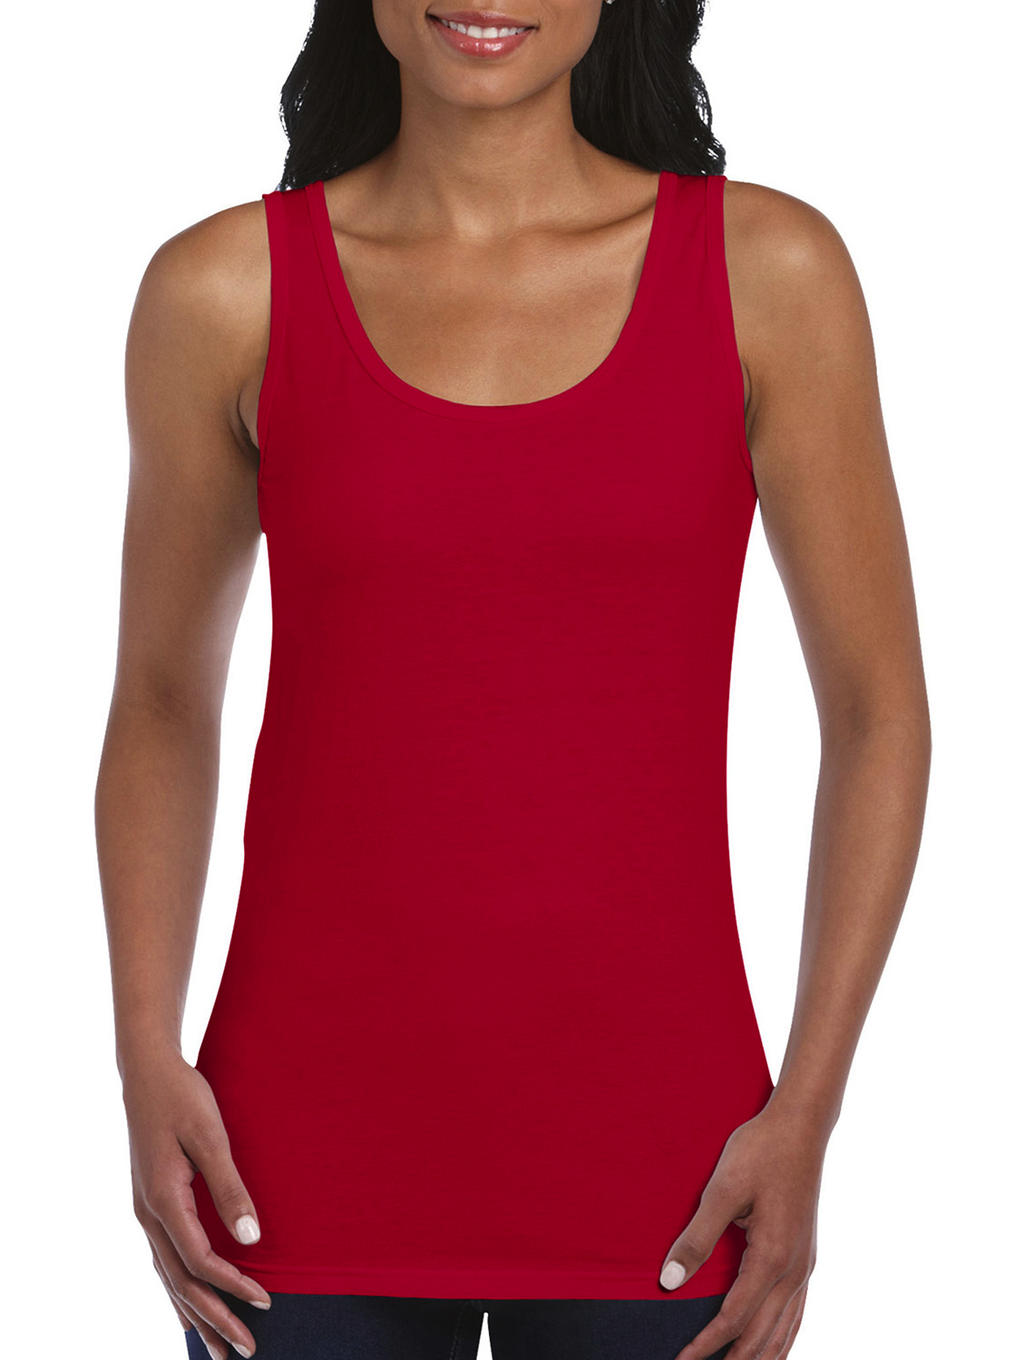  Gildan Ladies Softstyle? Tank Top in Farbe Cherry Red